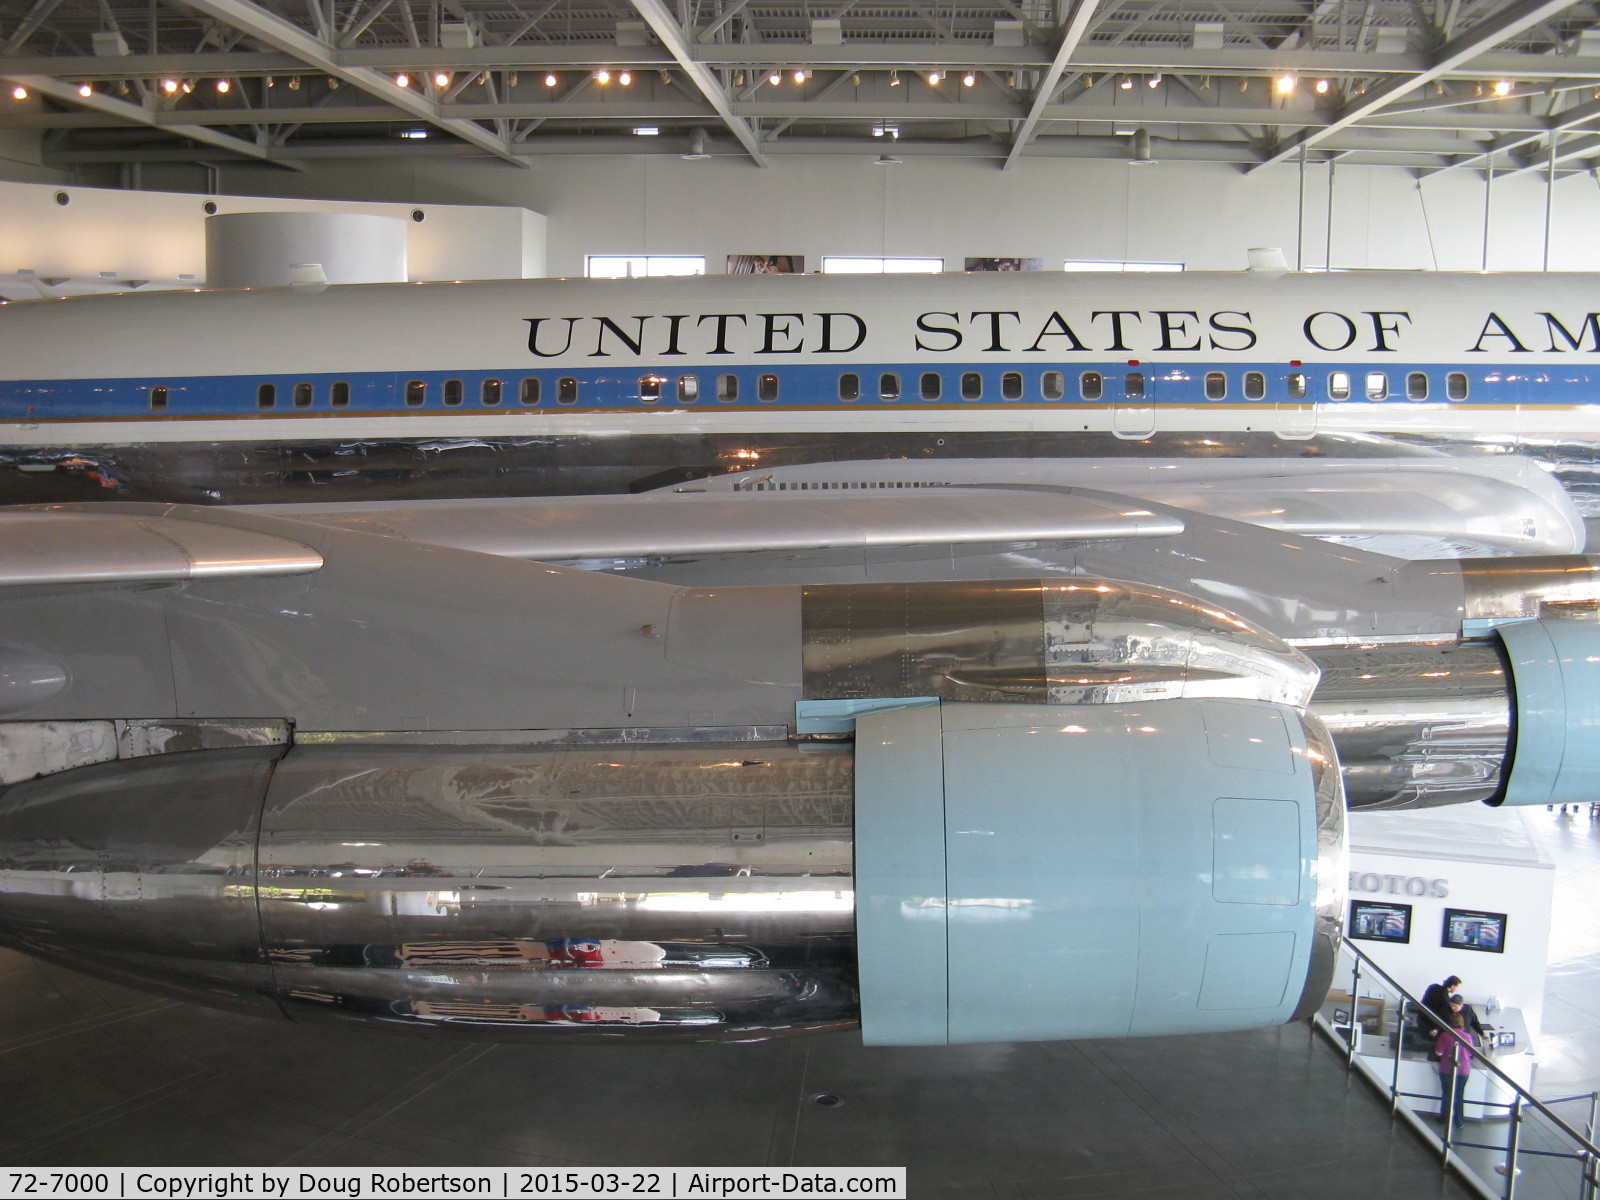 72-7000, 1972 Boeing VC-137C C/N 20630, 1972 Boeing VC-137C AIR FORCE ONE, aka 27000, four P&W TF33-PW-102 low bypass ratio Turbofans 18,000 lbf st each, at Ronald Reagan Presidential Library and Museum